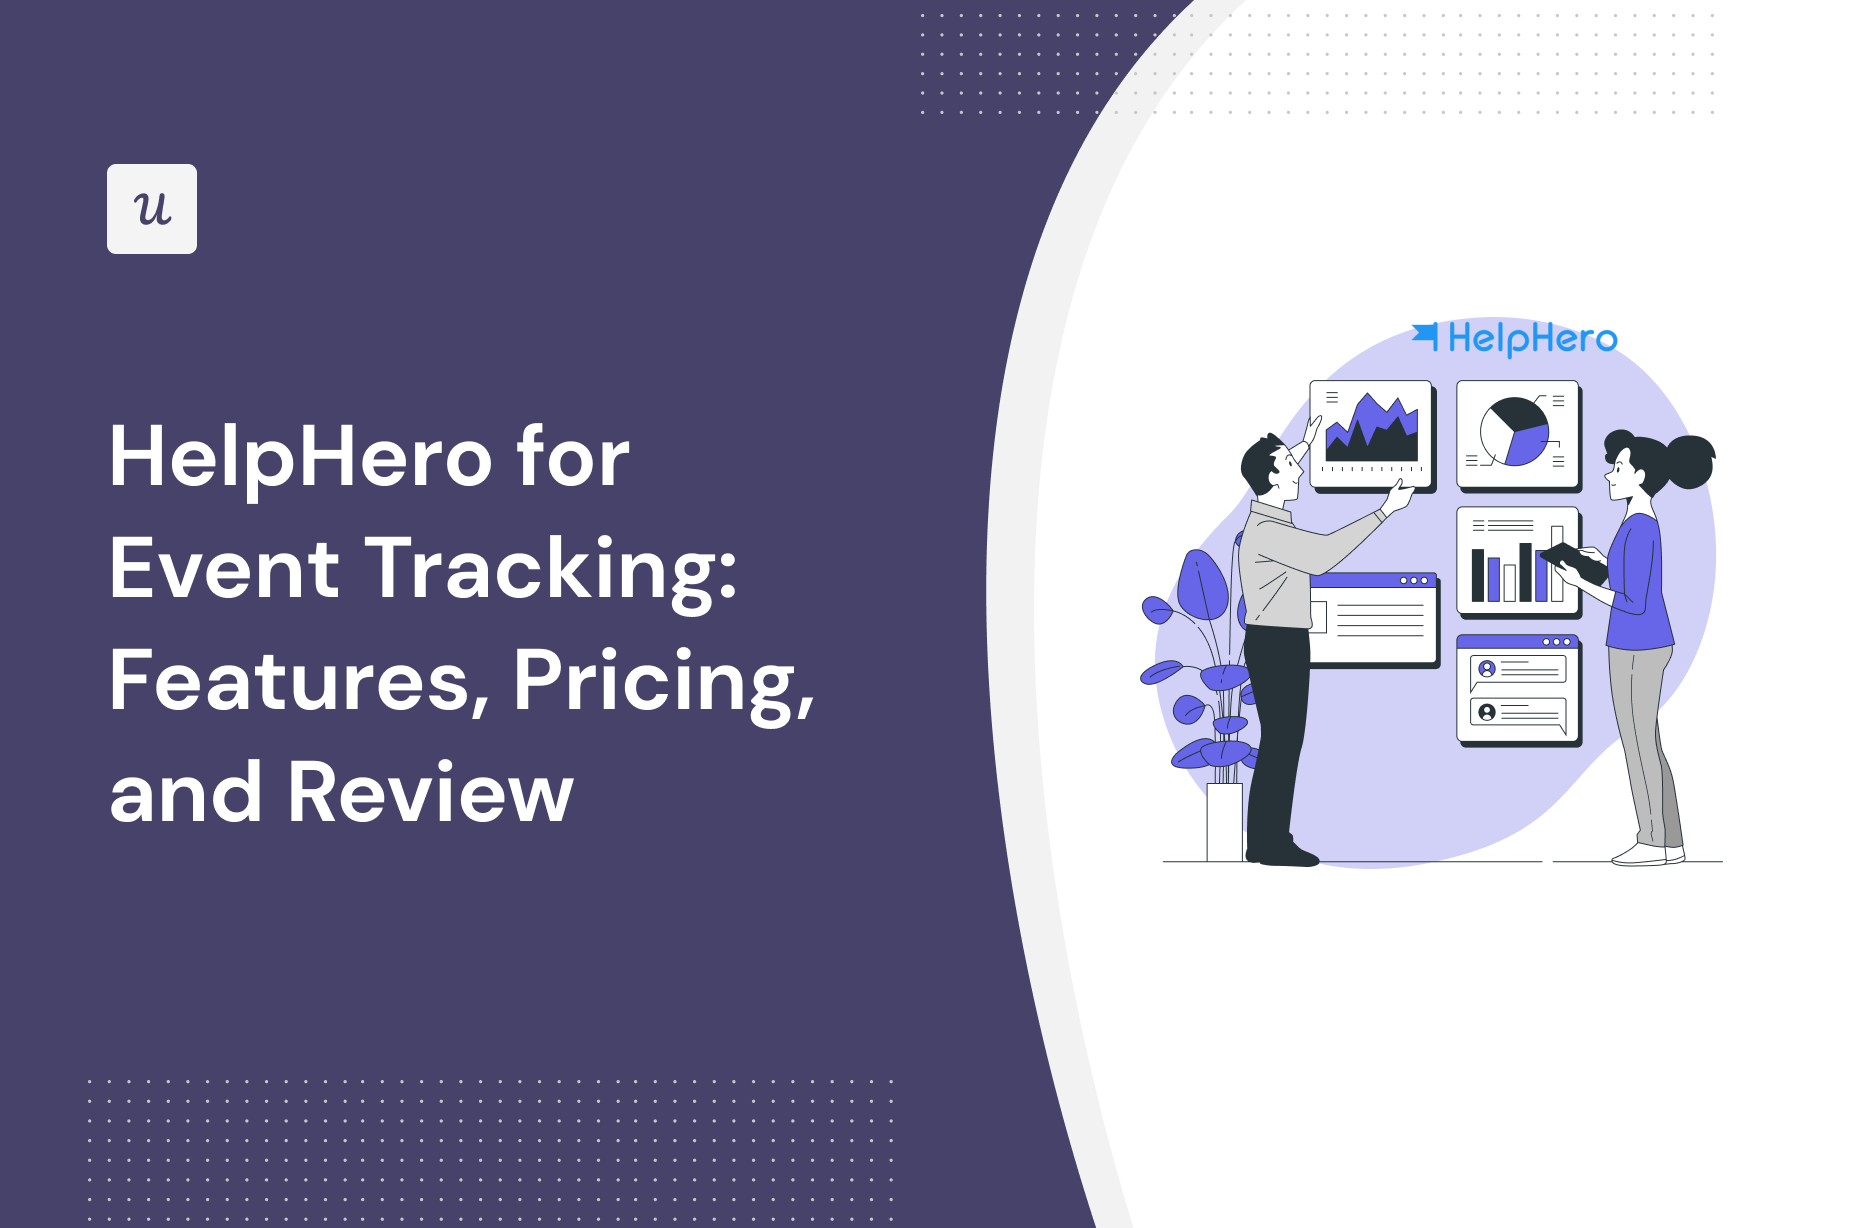 HelpHero for Event Tracking: Features, Pricing, and Review